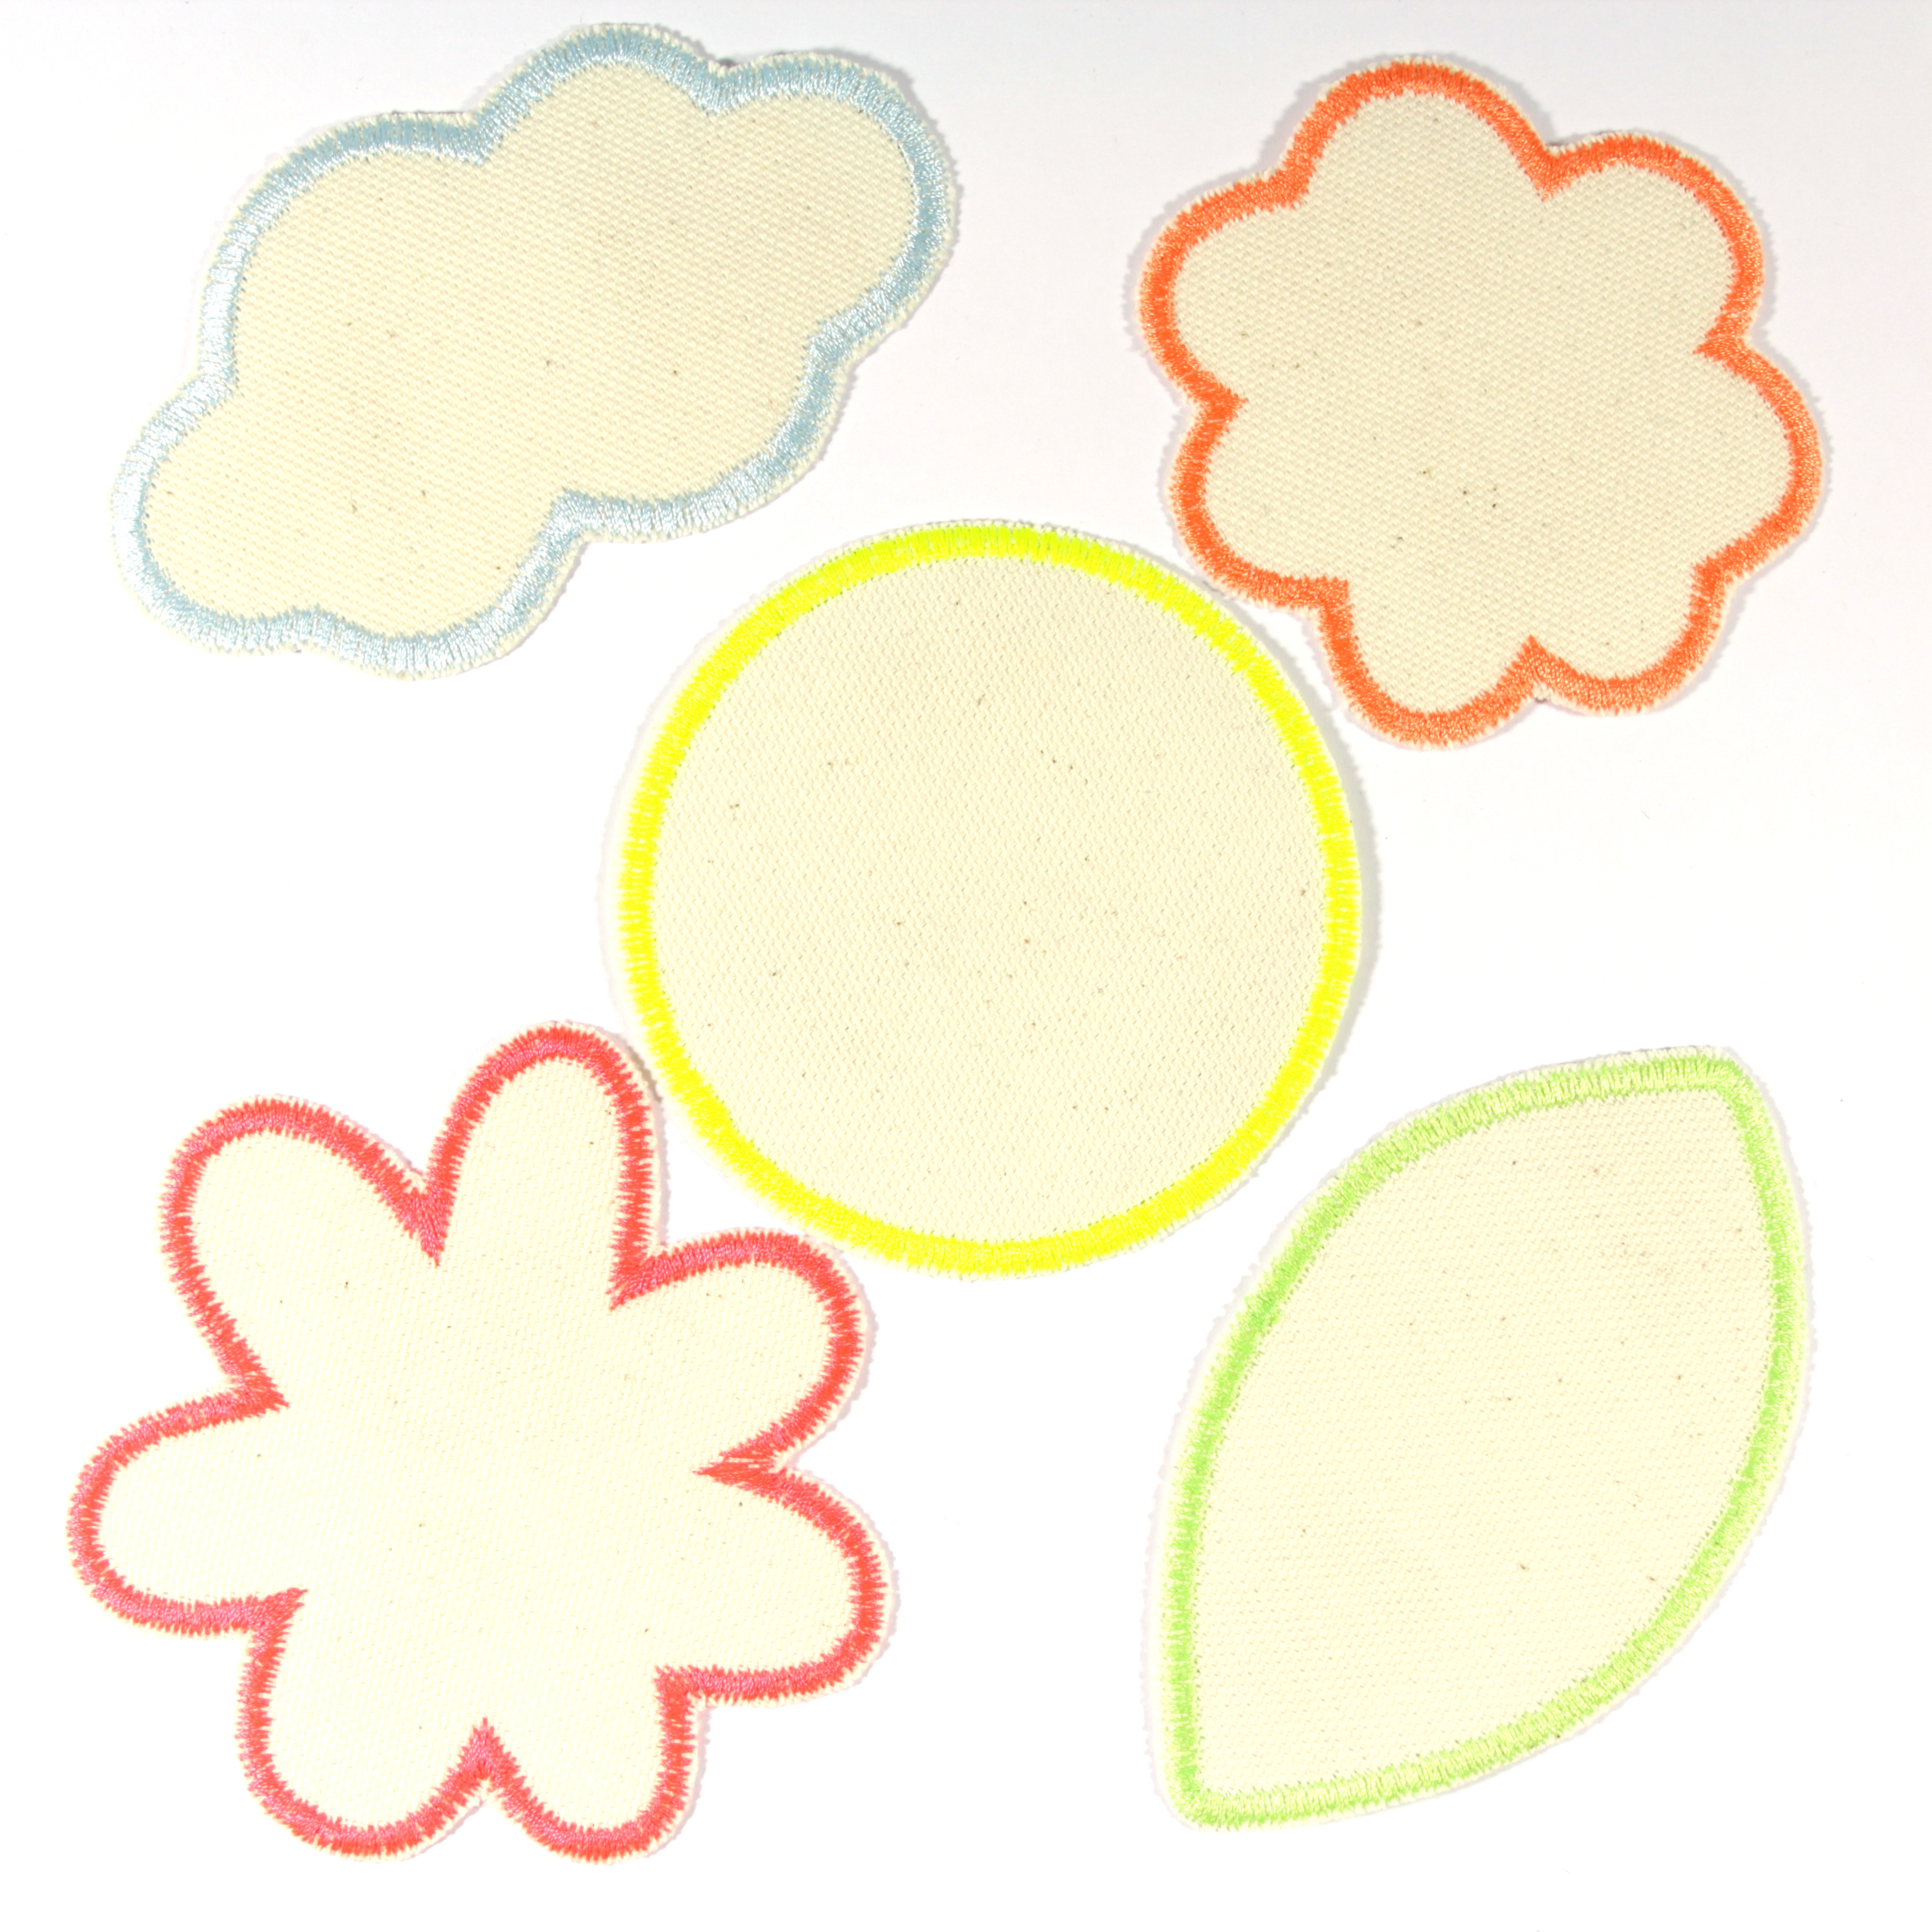 DIY set of 5 blank iron-on patches for painting set variant 1